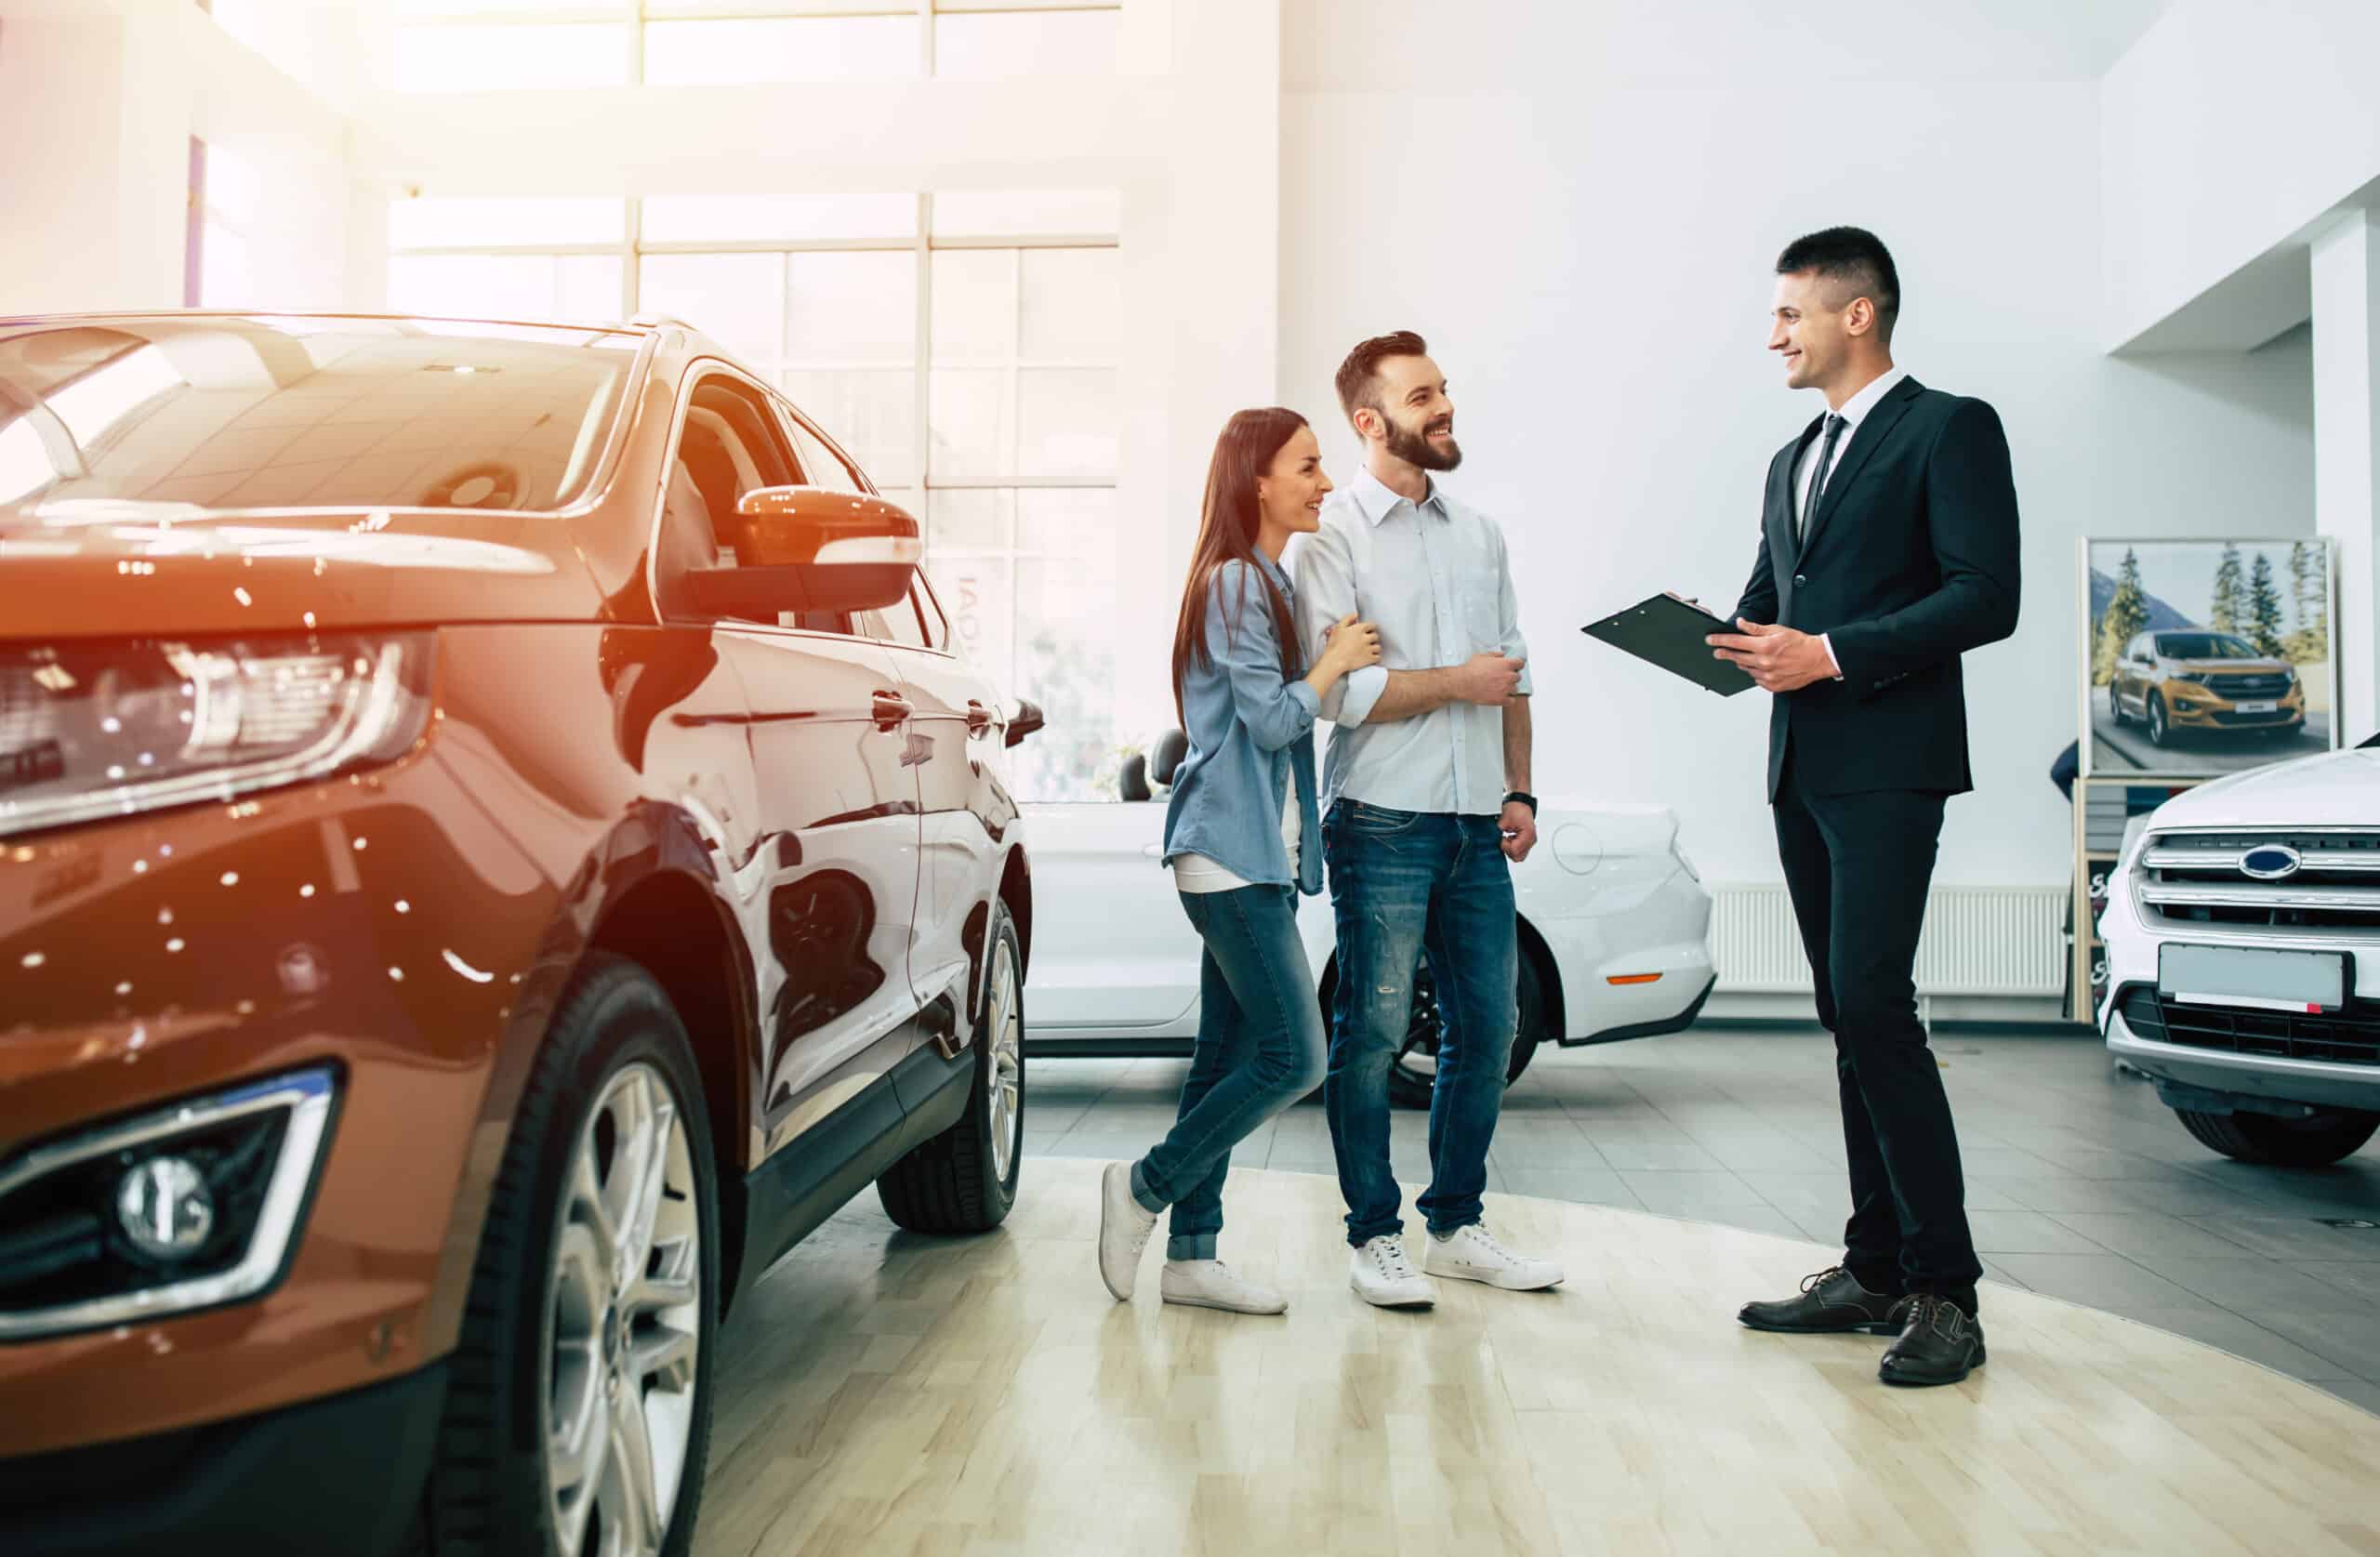 How Casabaca Toyota Leveraged Digital Transformation to Drive Customer Experience